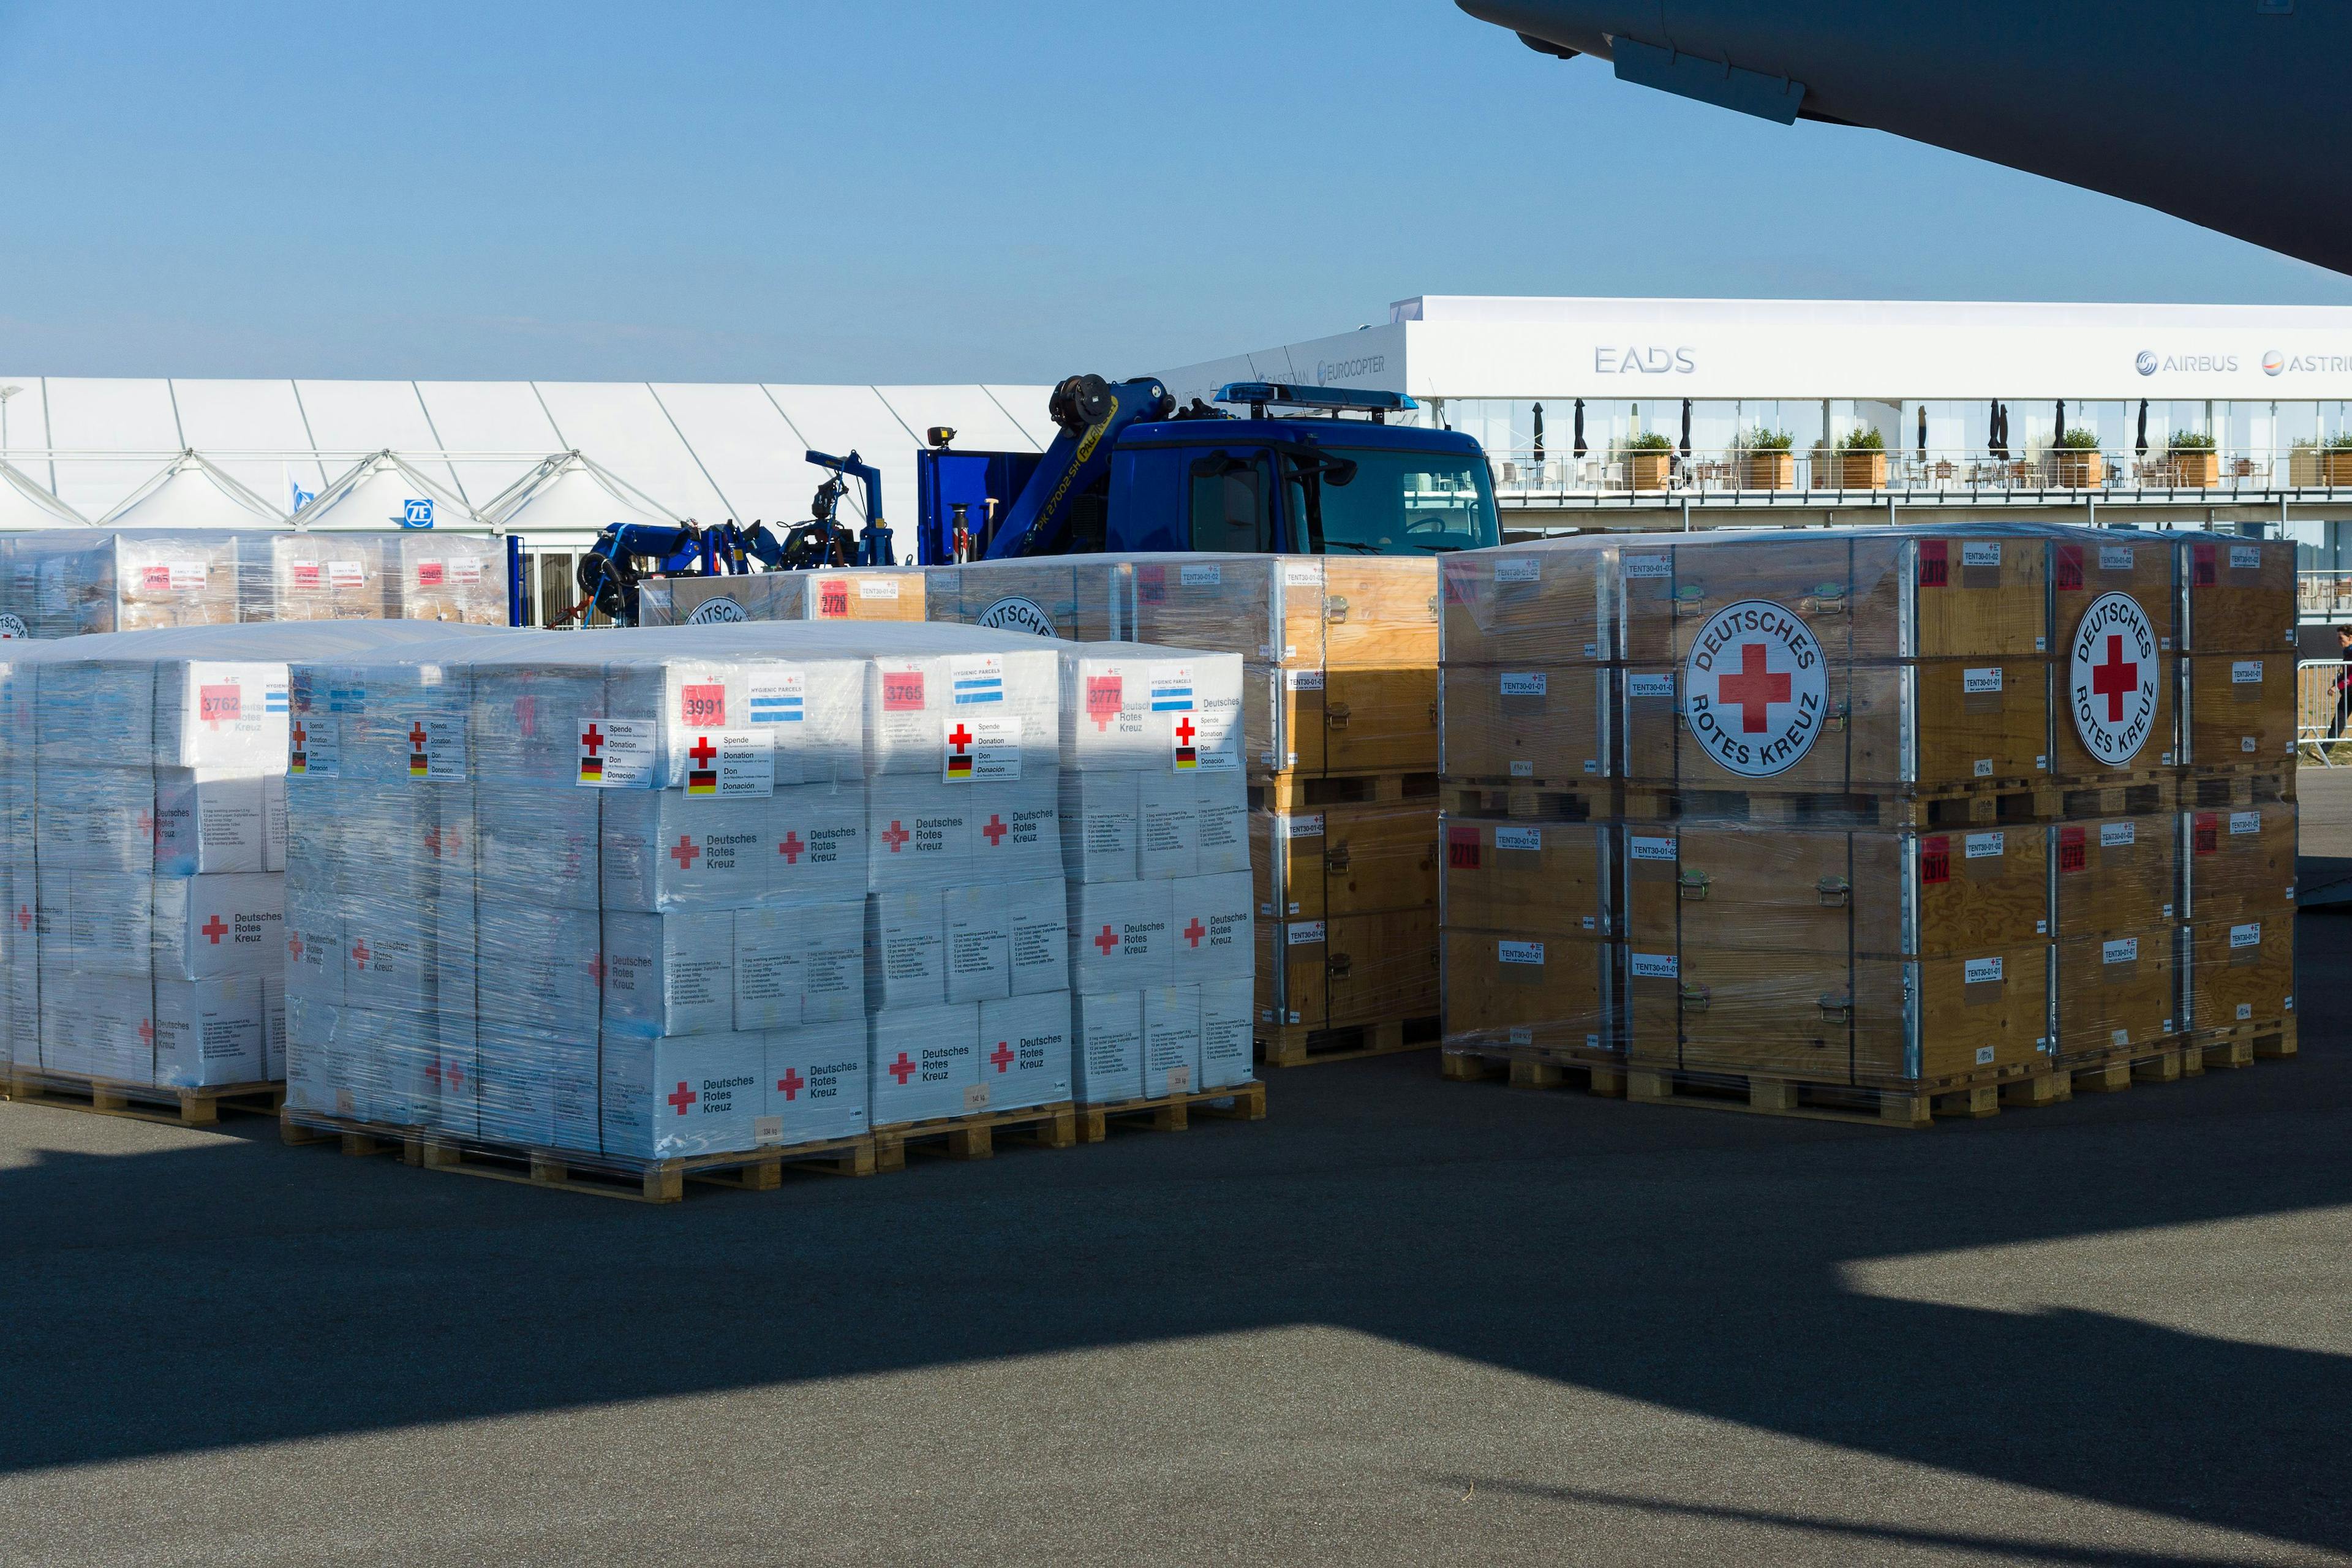 BERLIN - SEPTEMBER 14: Humanitarian assistance to the German Red Cross, International Aerospace Exhibition "ILA Berlin Air Show", September 14, 2012 in Berlin, Germany. Photo Credit: Adobe Stock Images/Sergey Kohl